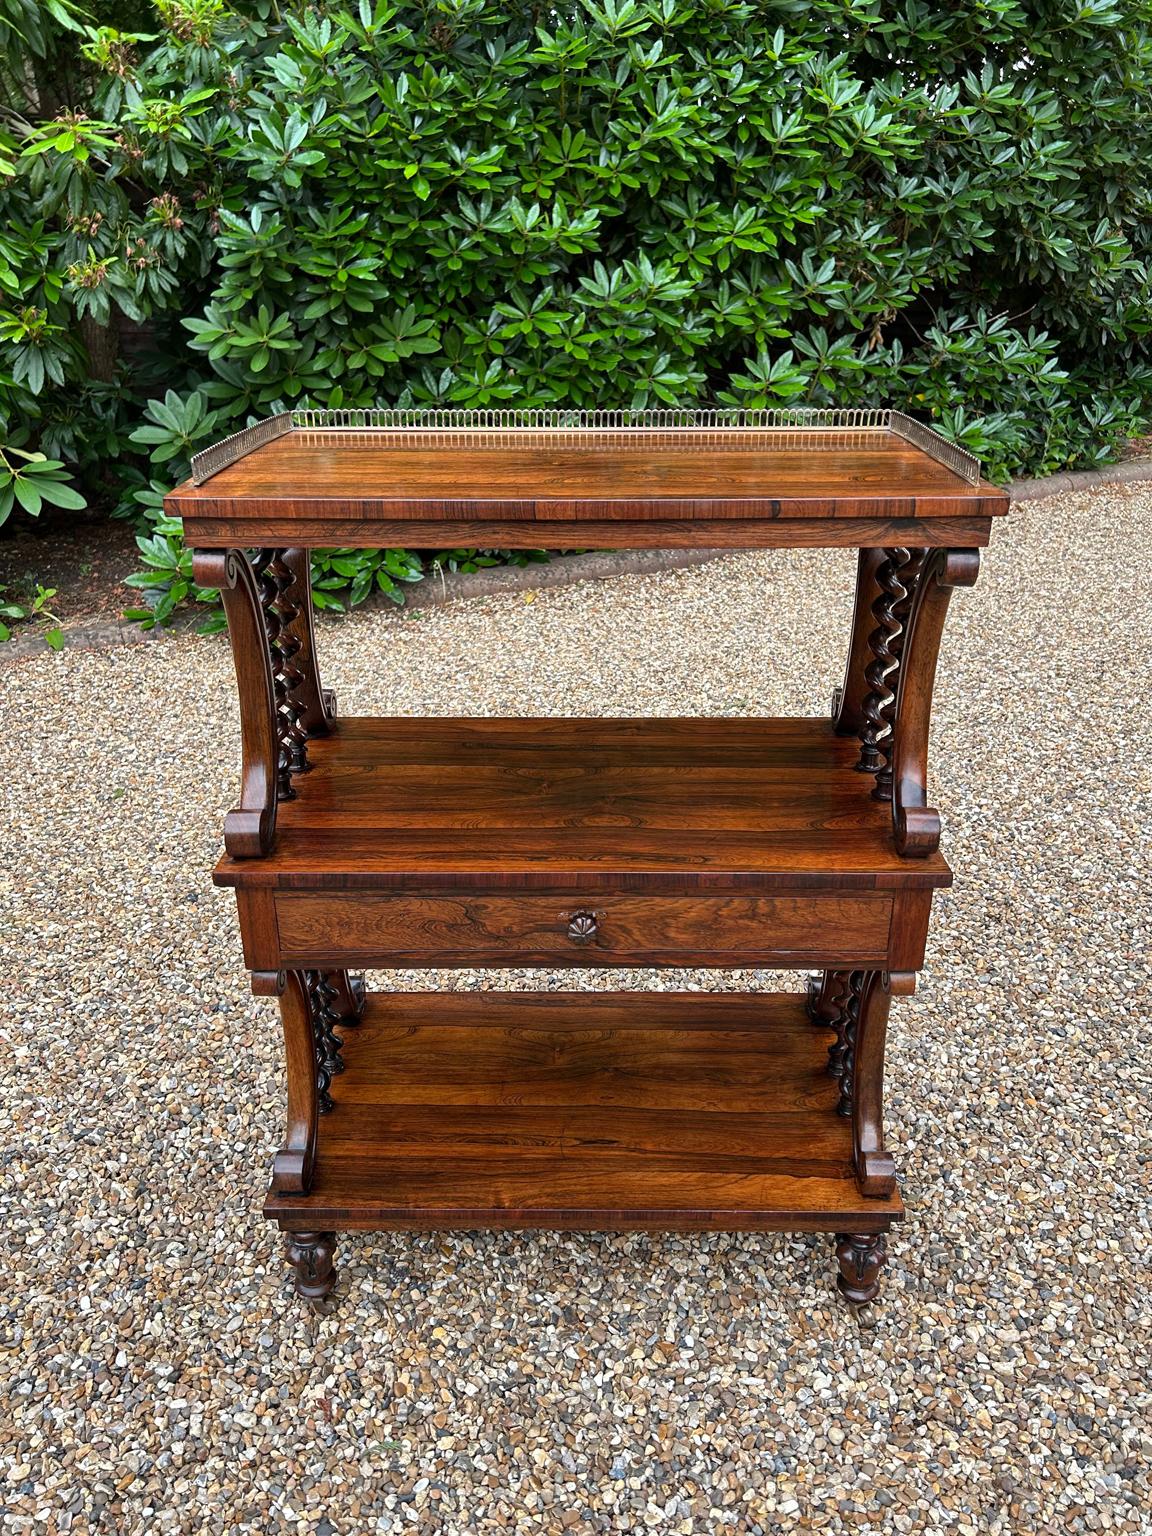 19th Century William IV Rosewood Whatnot, with brass gallery, over three tiers raised on turned spiral barley twist rosewood uprights, with a drawer to one shelf, all standing on turned carved legs and castors.

Circa: 1835

Dimensions:
Height:  38